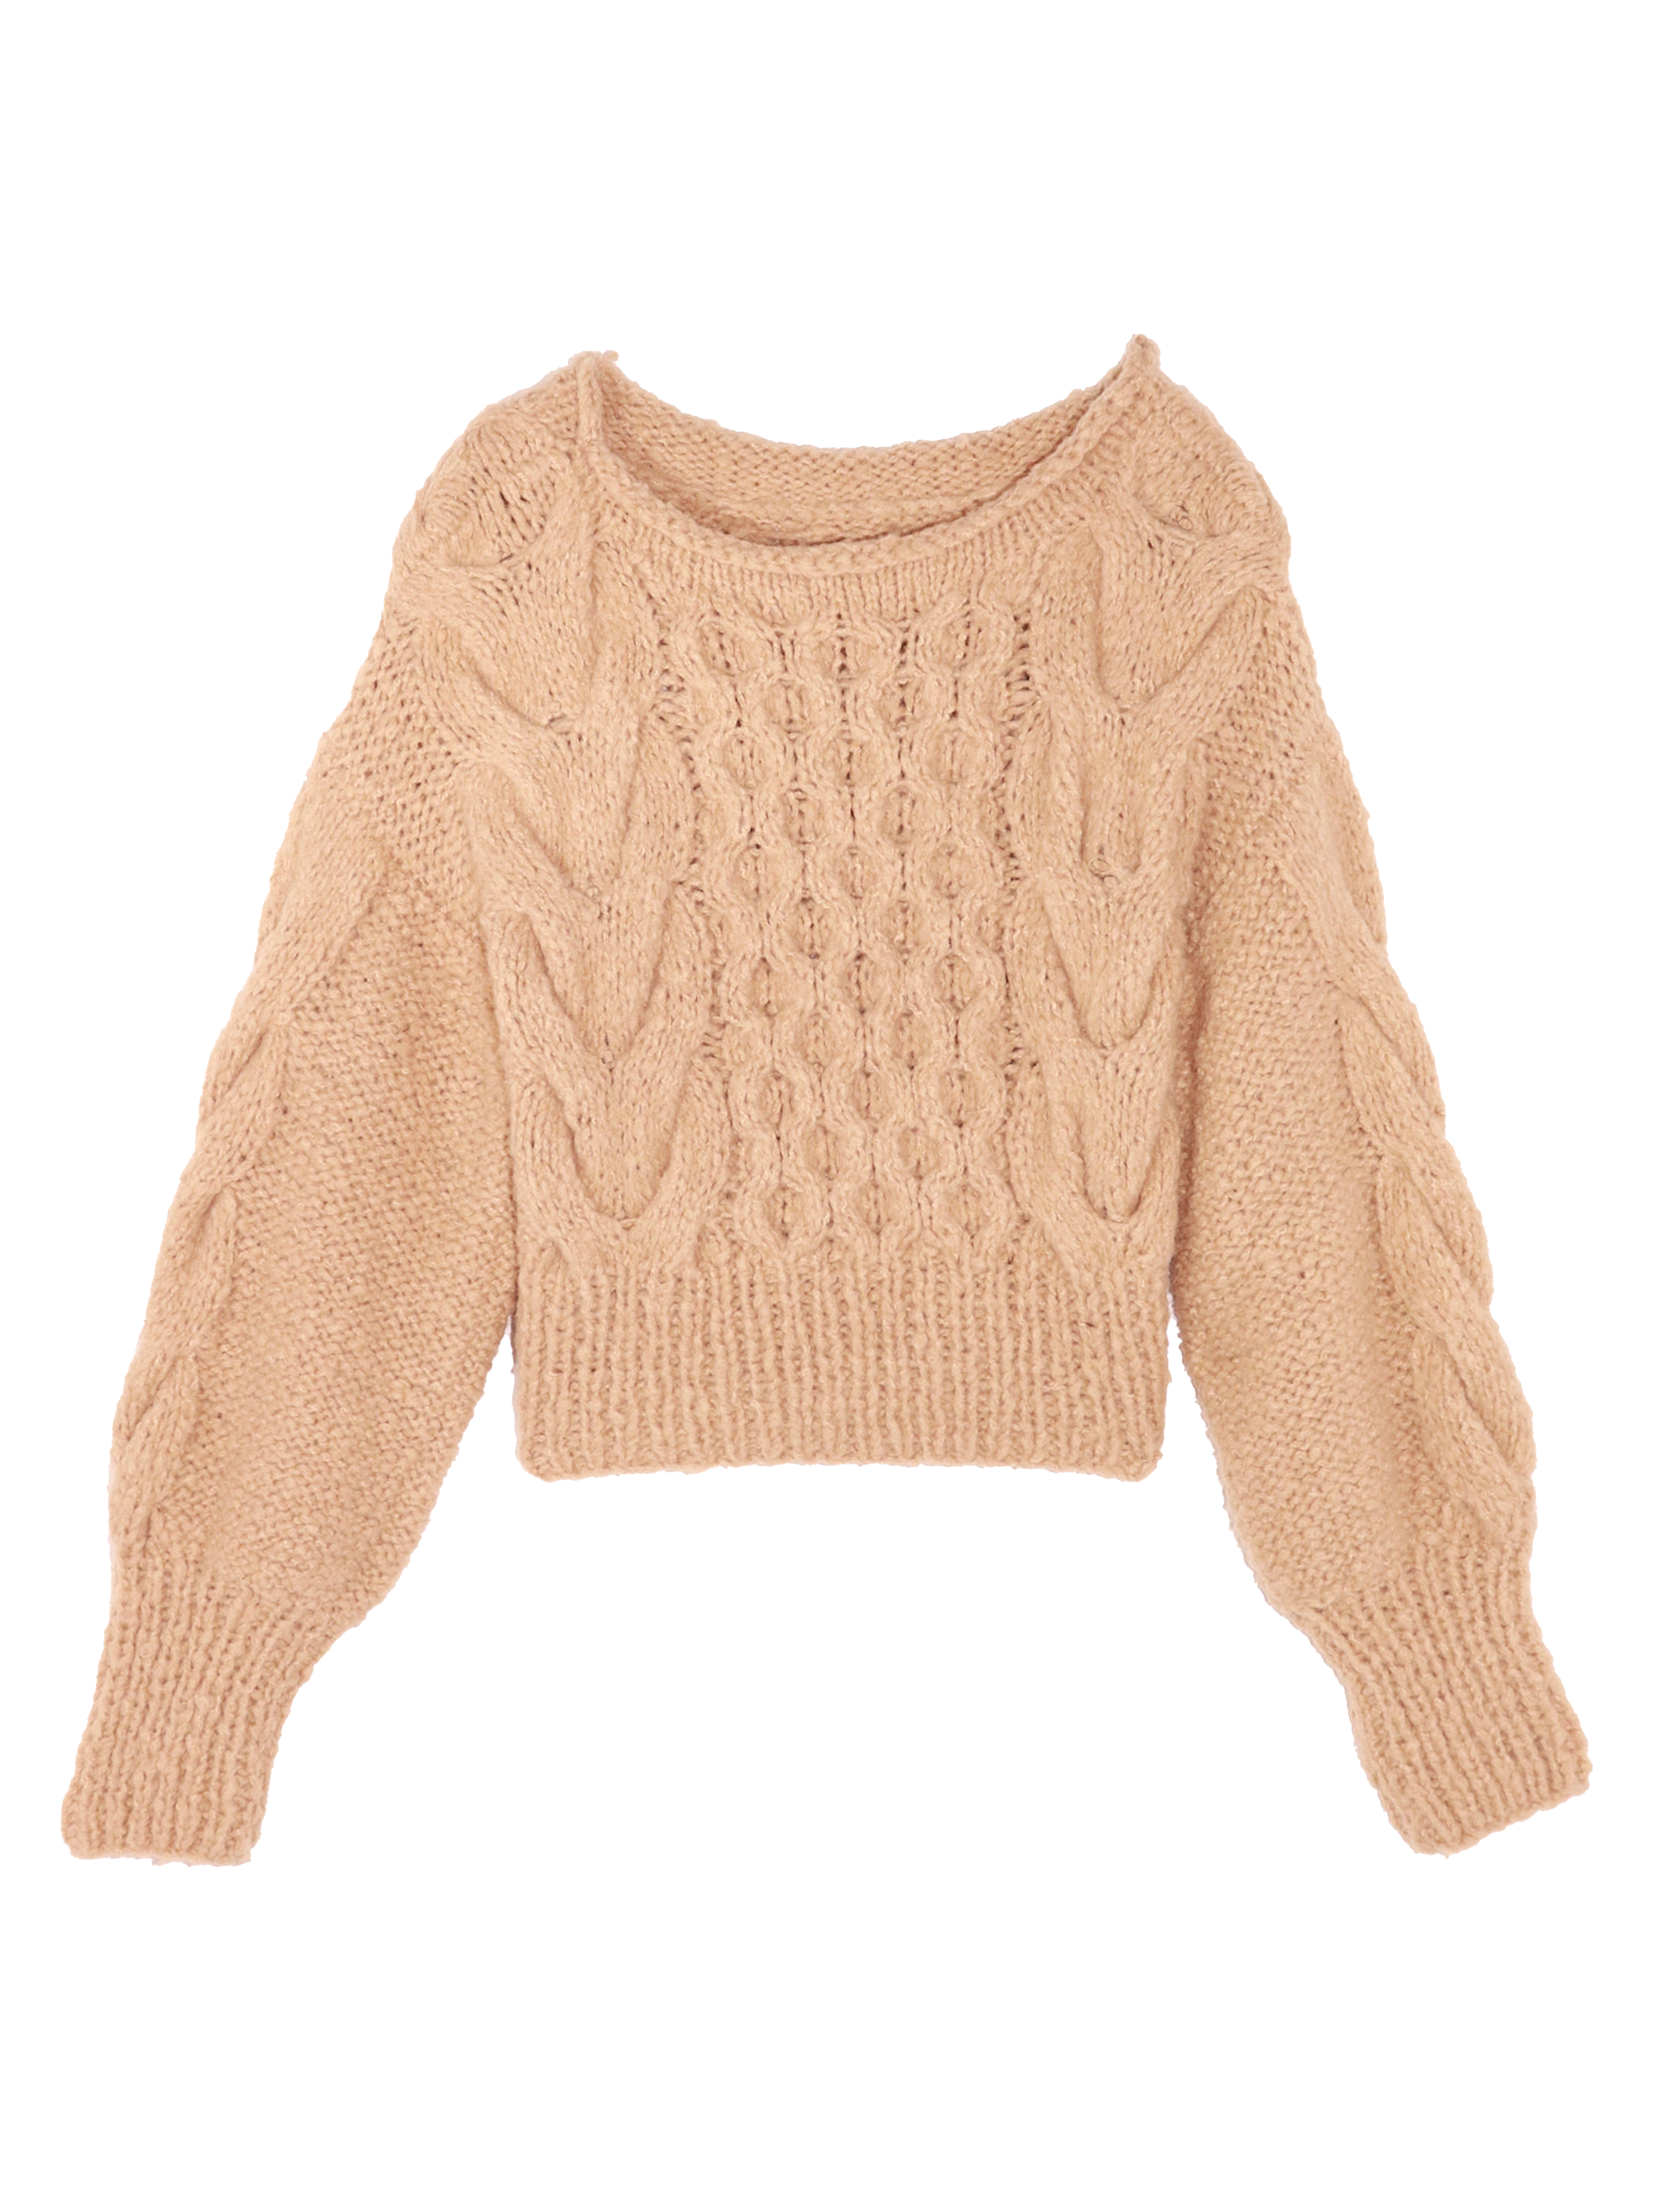 Wool Warm Cable Knit Sweater T924 – Tiffy mohair